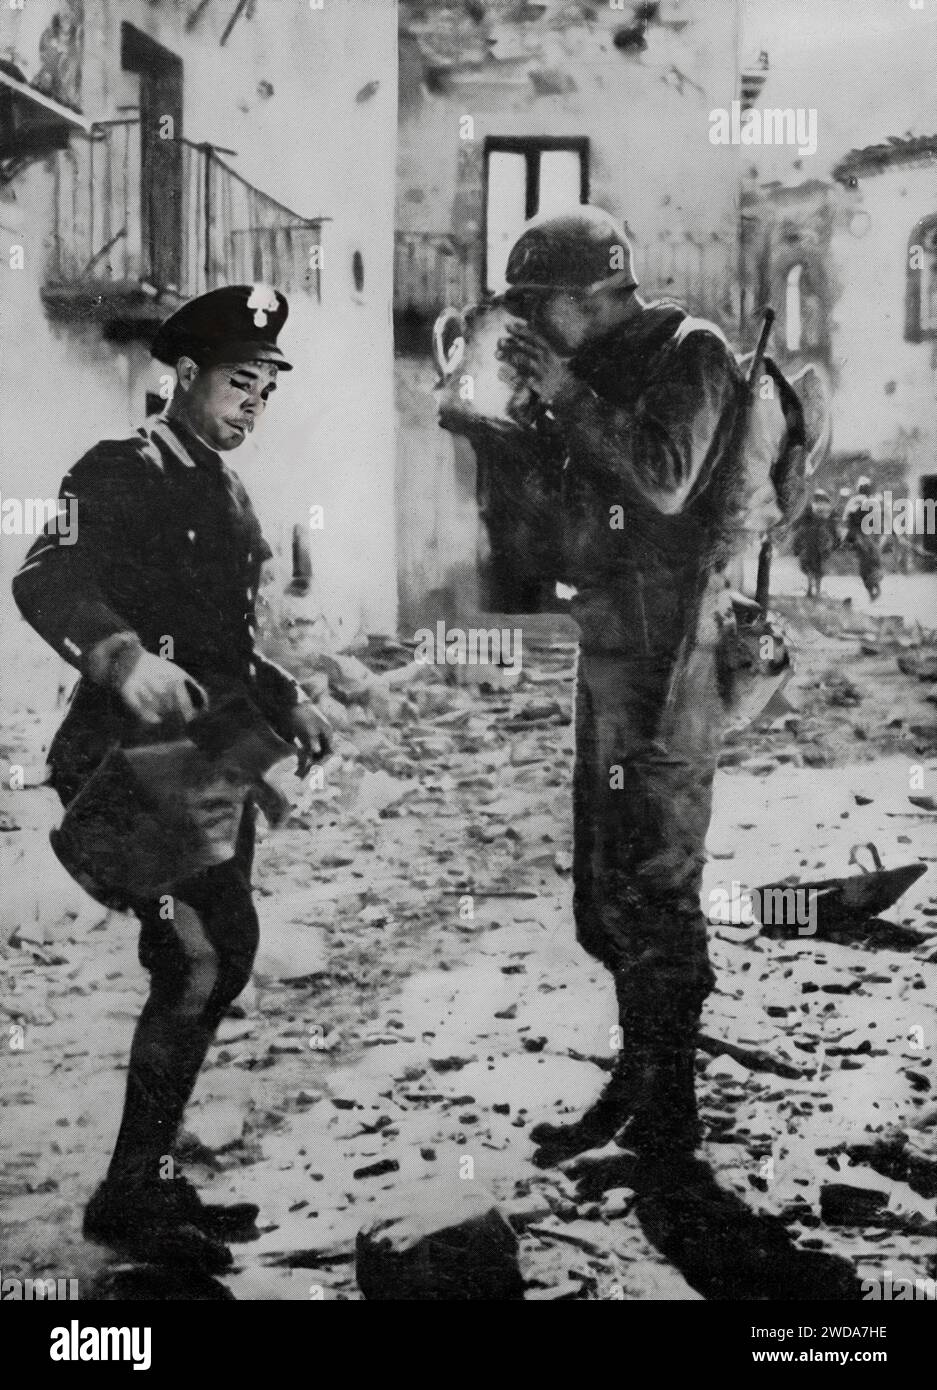 An Italian Policeman gives an American Soldier a drink in Naples on 29th September 1943 following landings on Salerno beach during the Second World War invasion of Italy. Stock Photo